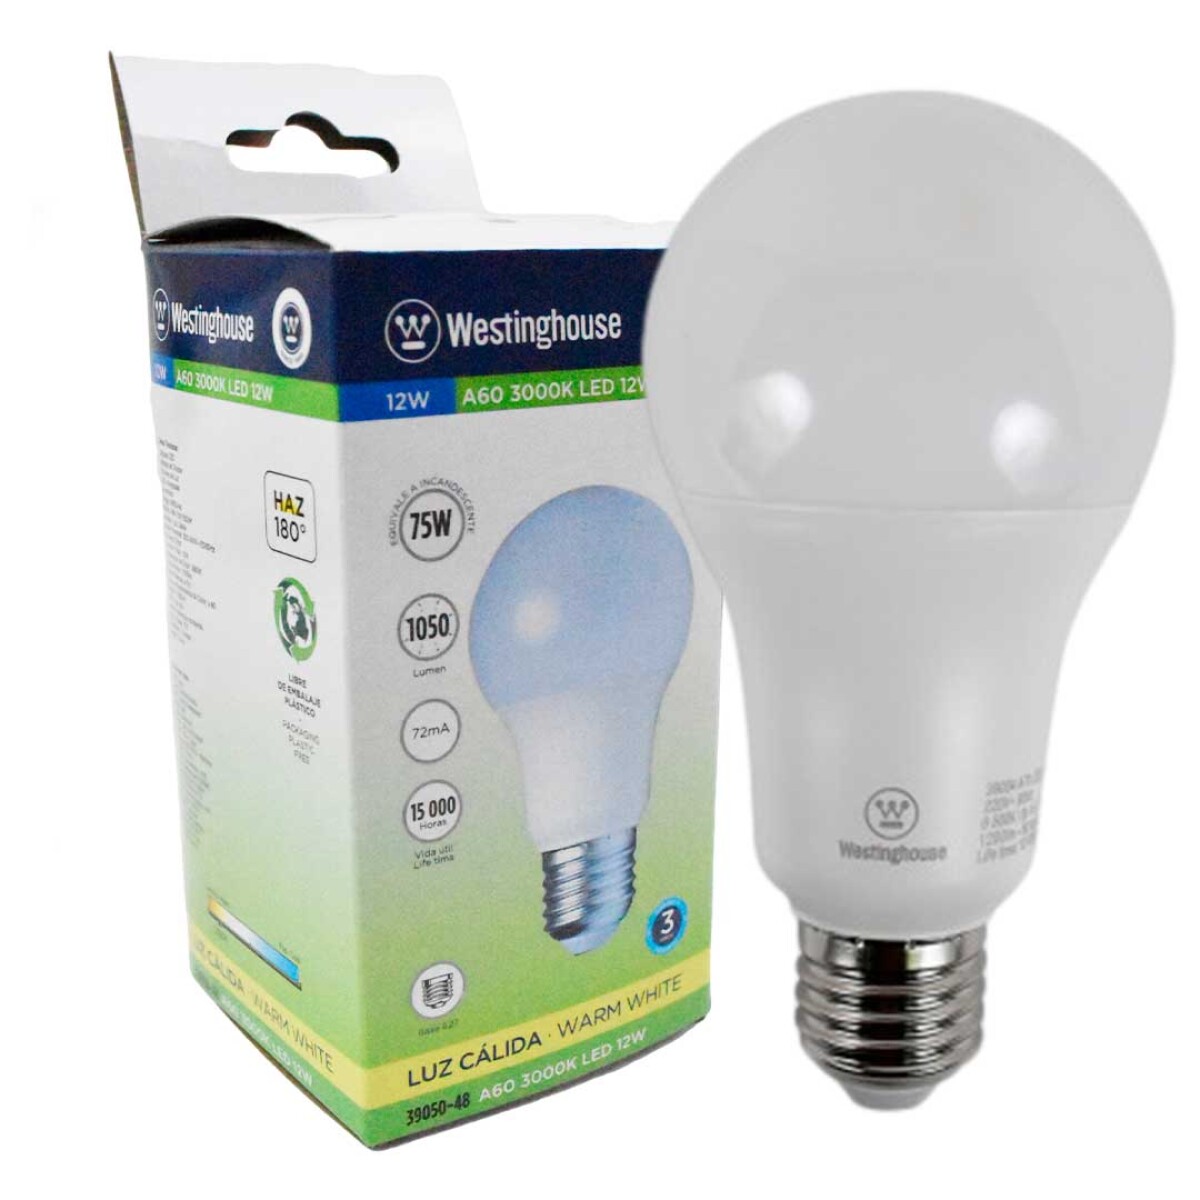 LAMPARA LED WESTINGHOUSE 12 W E27 A60 CALIDA 1050LM NON-DIMMABLE 39050-48 